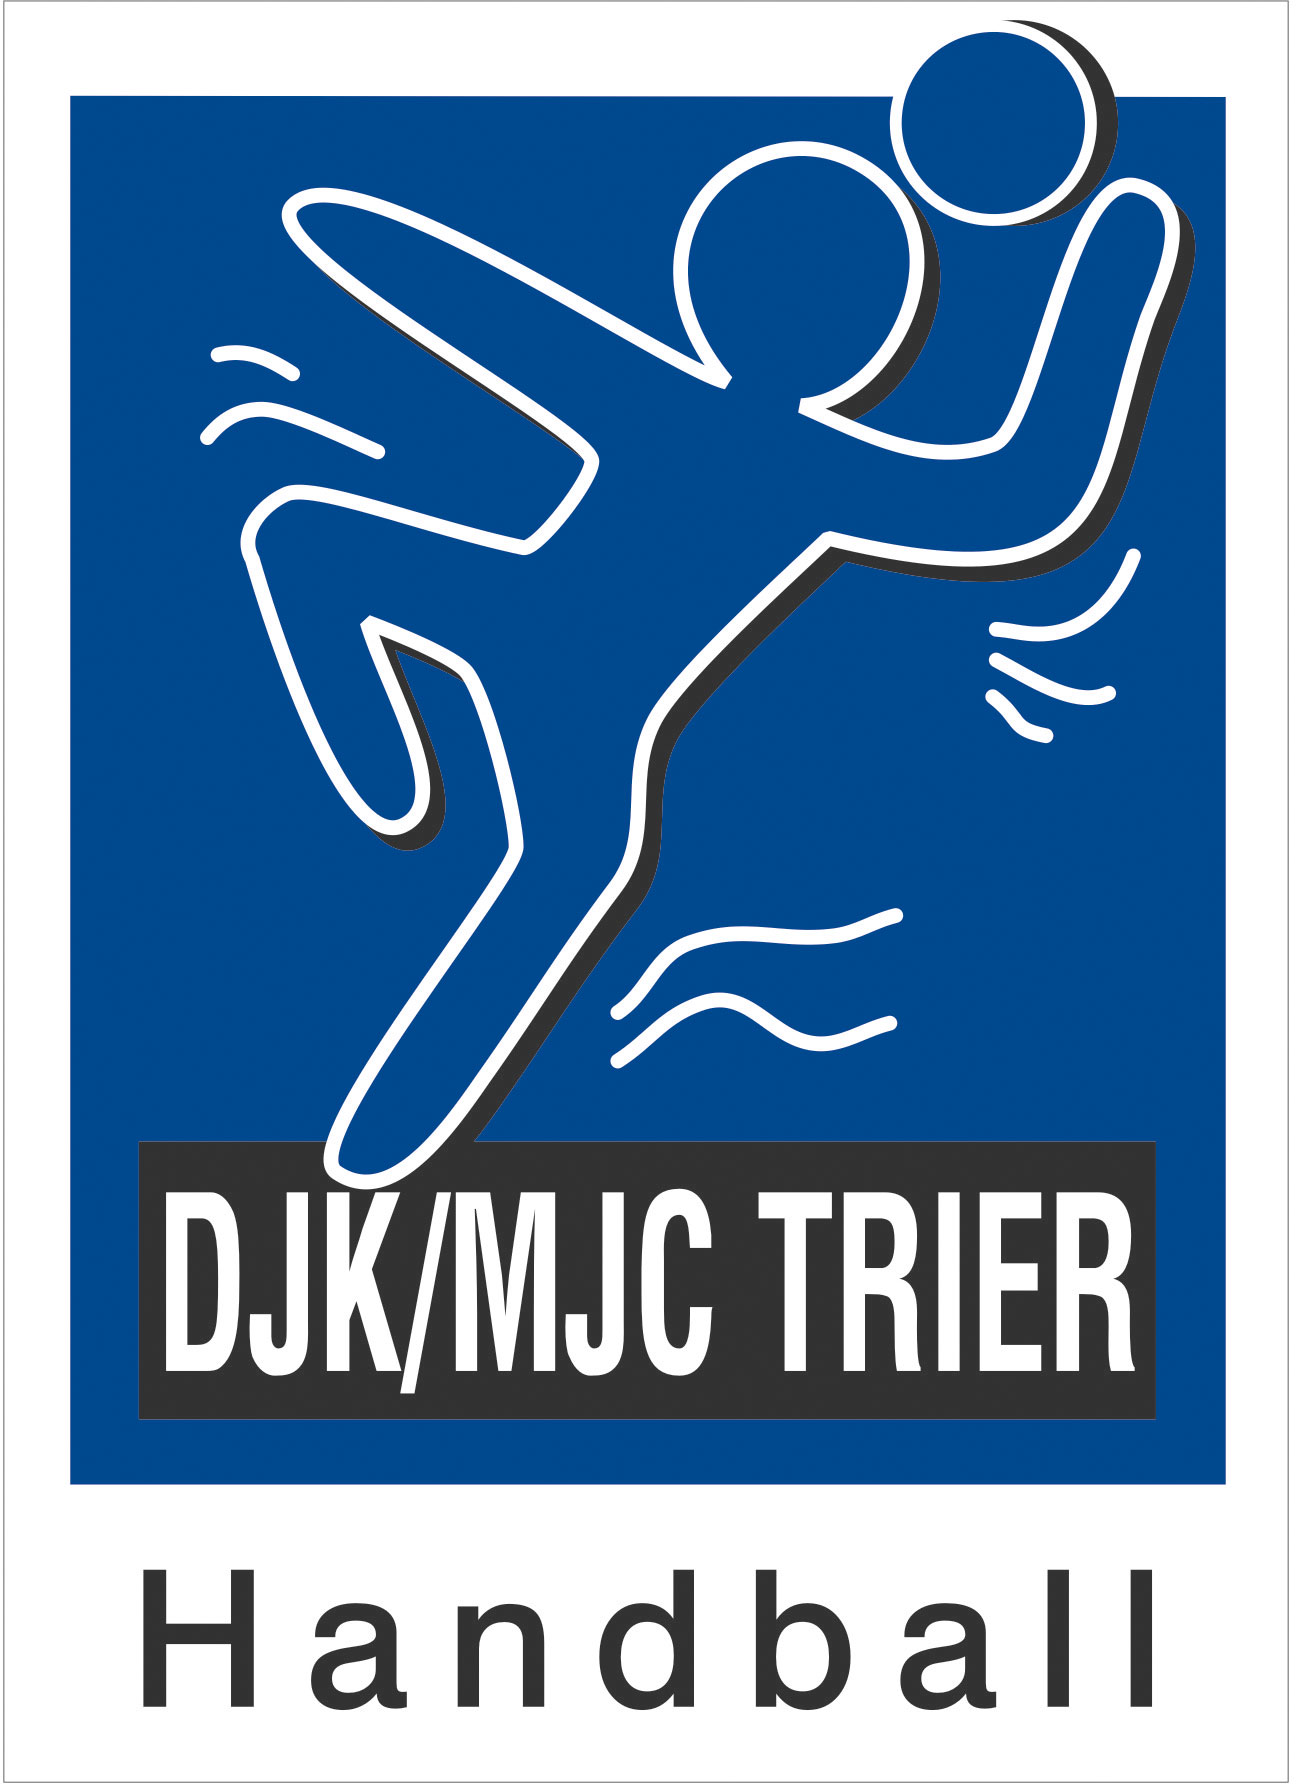 You are currently viewing DJK/MJC Trier